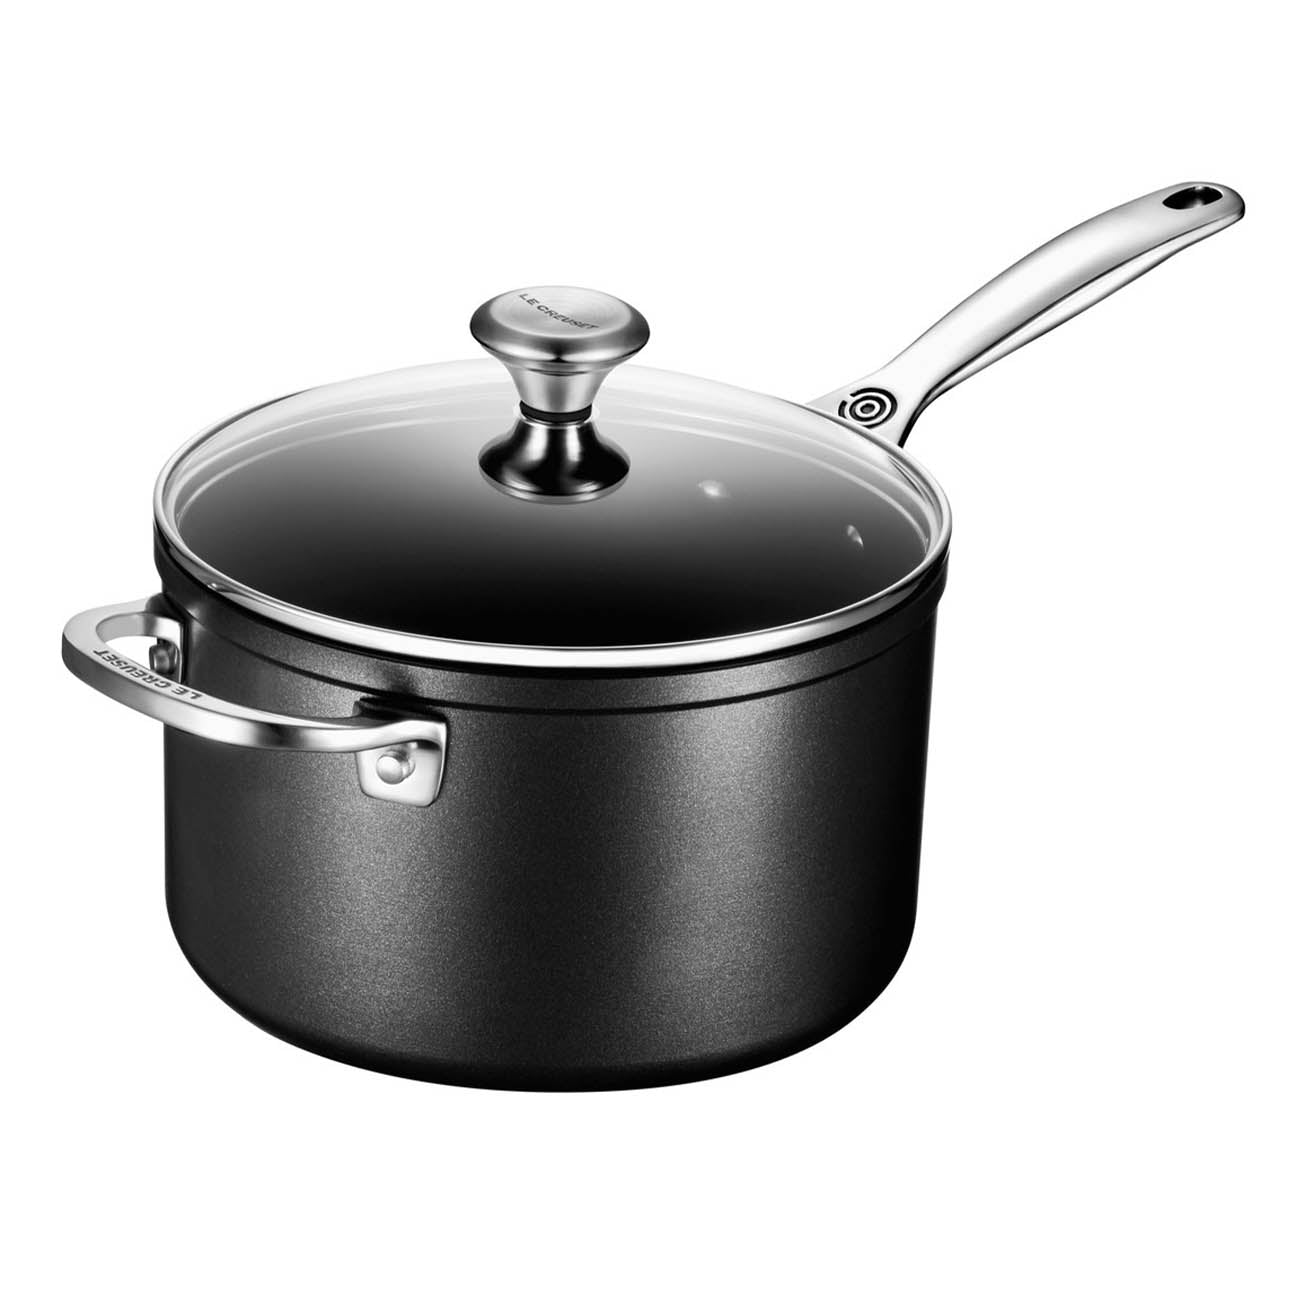 Stainless Steel Saucepan with Glass Lid, Professional Sauce Pan